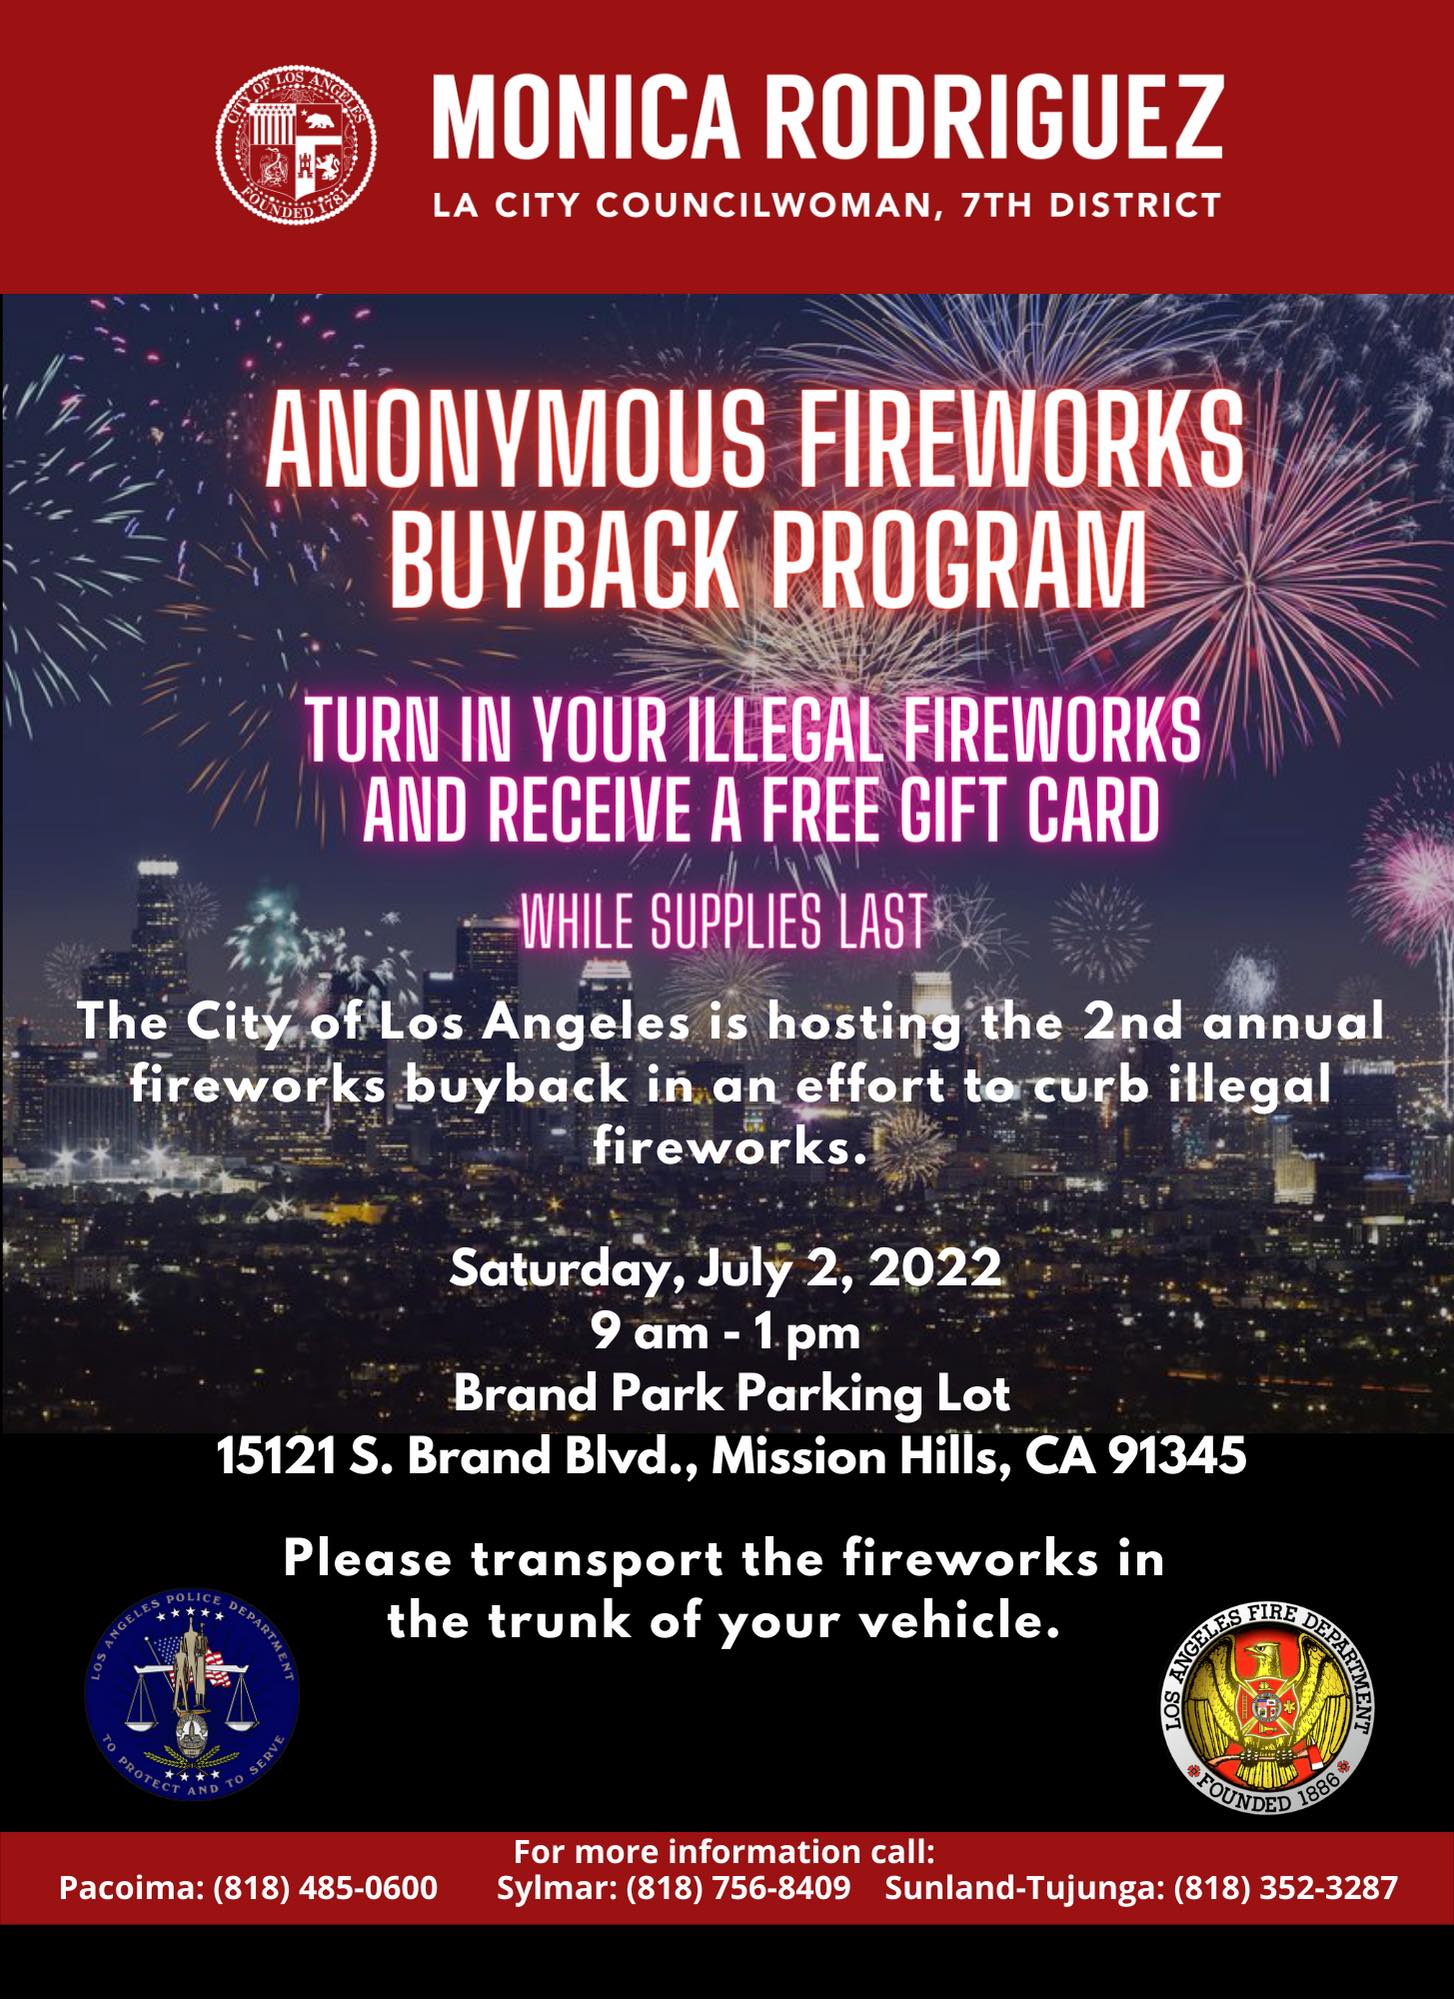 Our Second Annual Fireworks Buyback on July 2